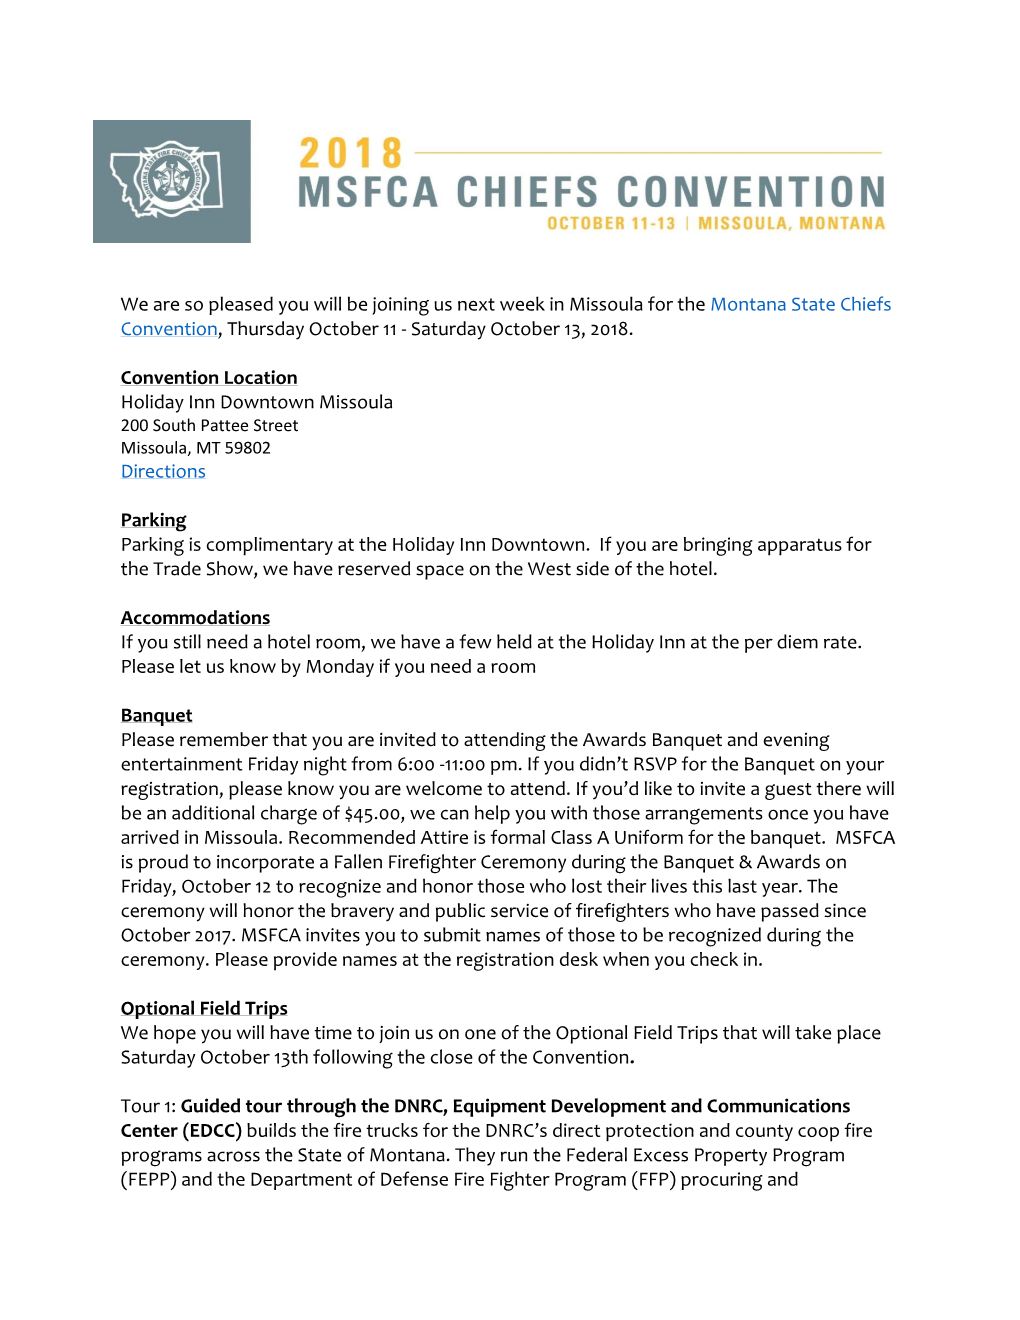 We Are So Pleased You Will Be Joining Us Next Week in Missoula for the Montana State Chiefs Convention, Thursday October 11 - Saturday October 13, 2018